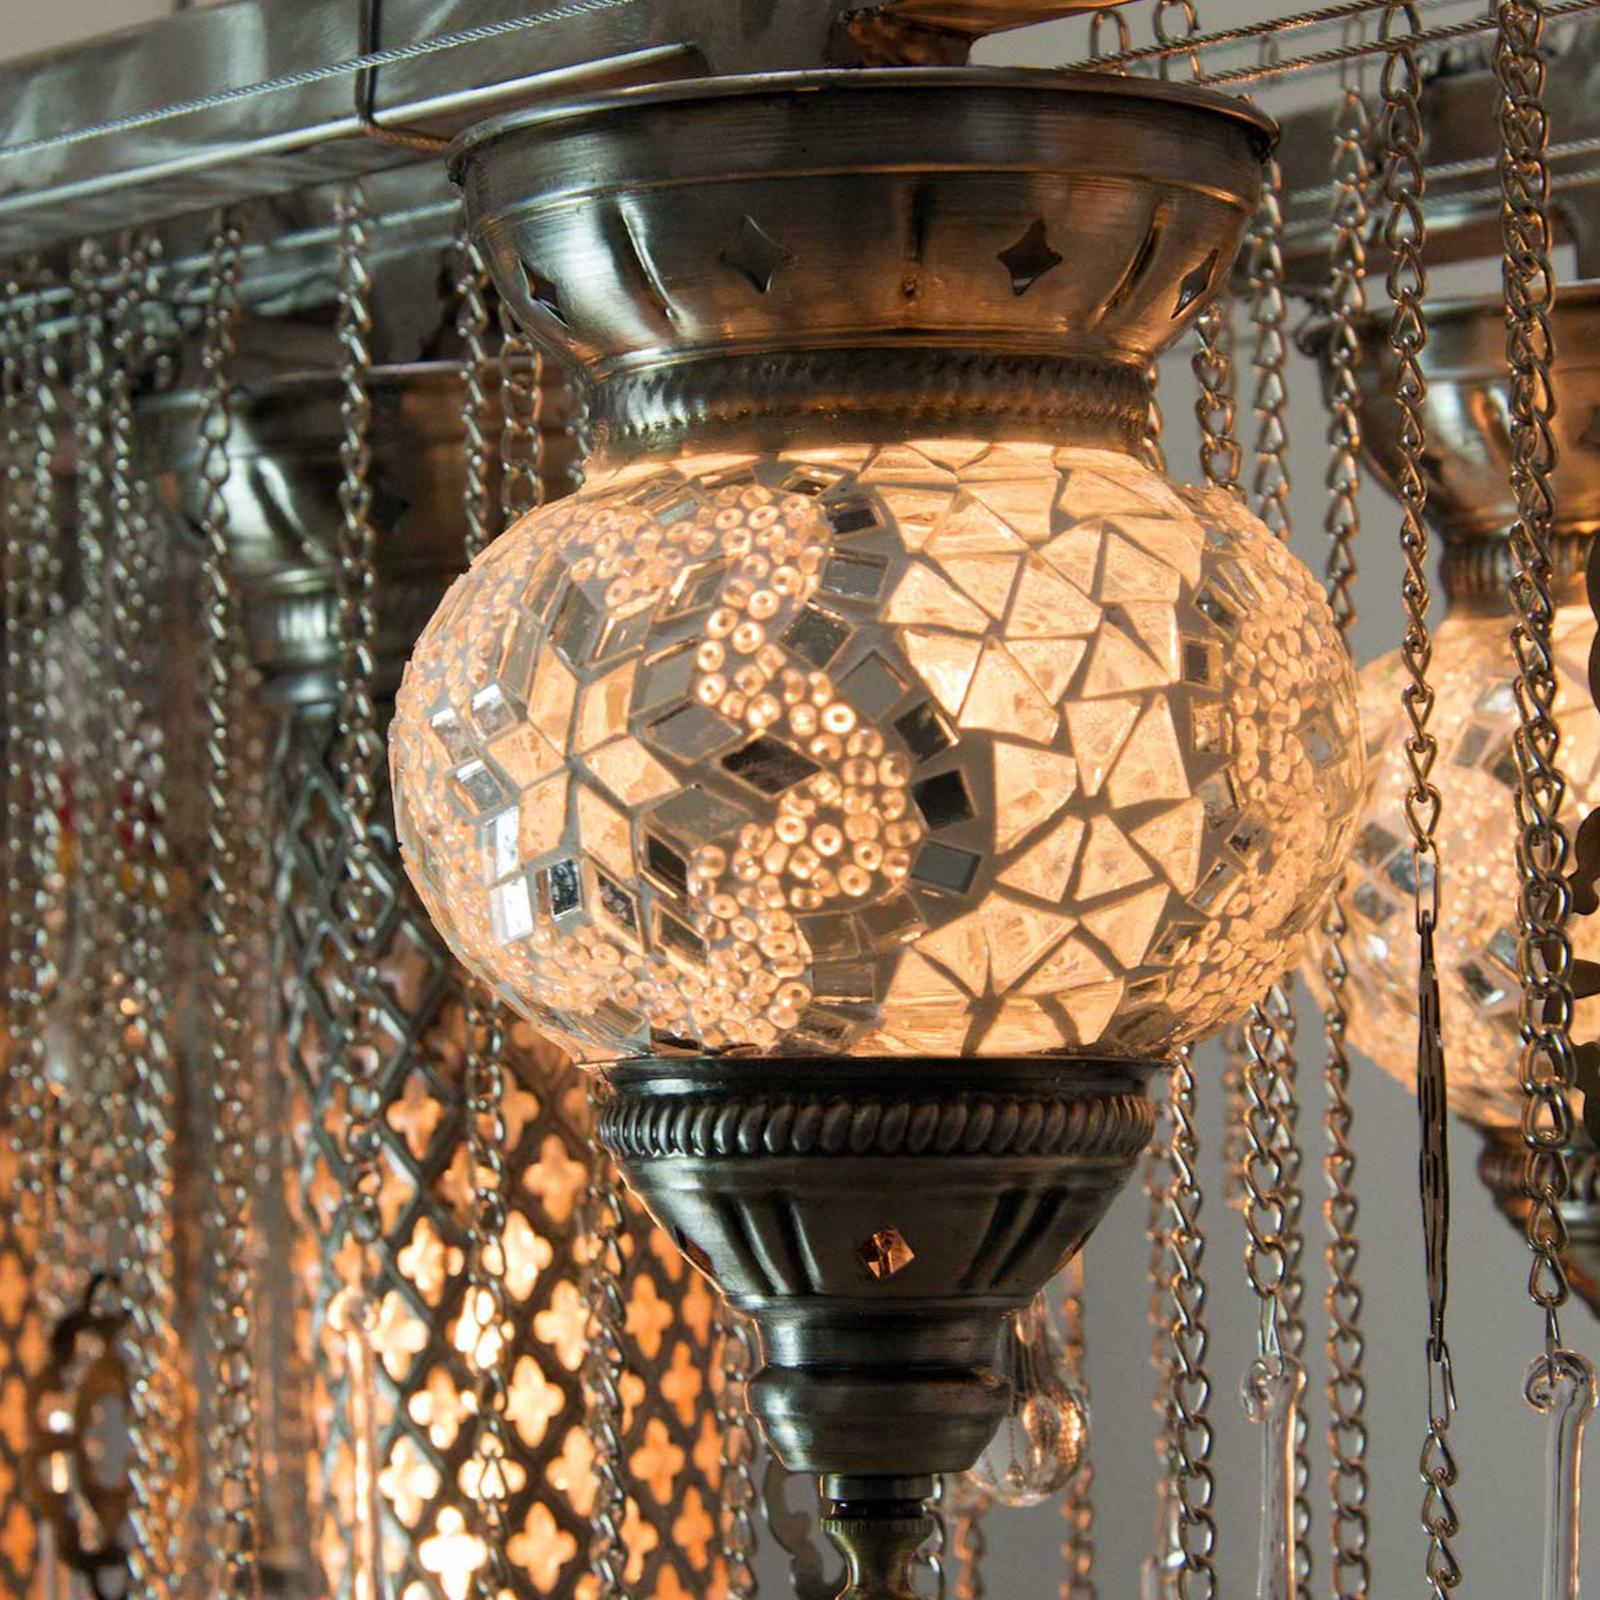 Transport your interior space to the Grand Bazaar with the Matrix Istanbul linear suspension chandelier. This highly-detailed modern chandelier features genuine ottoman hand blown glass and metal lanterns, chains, and drop crystals. The hand blown